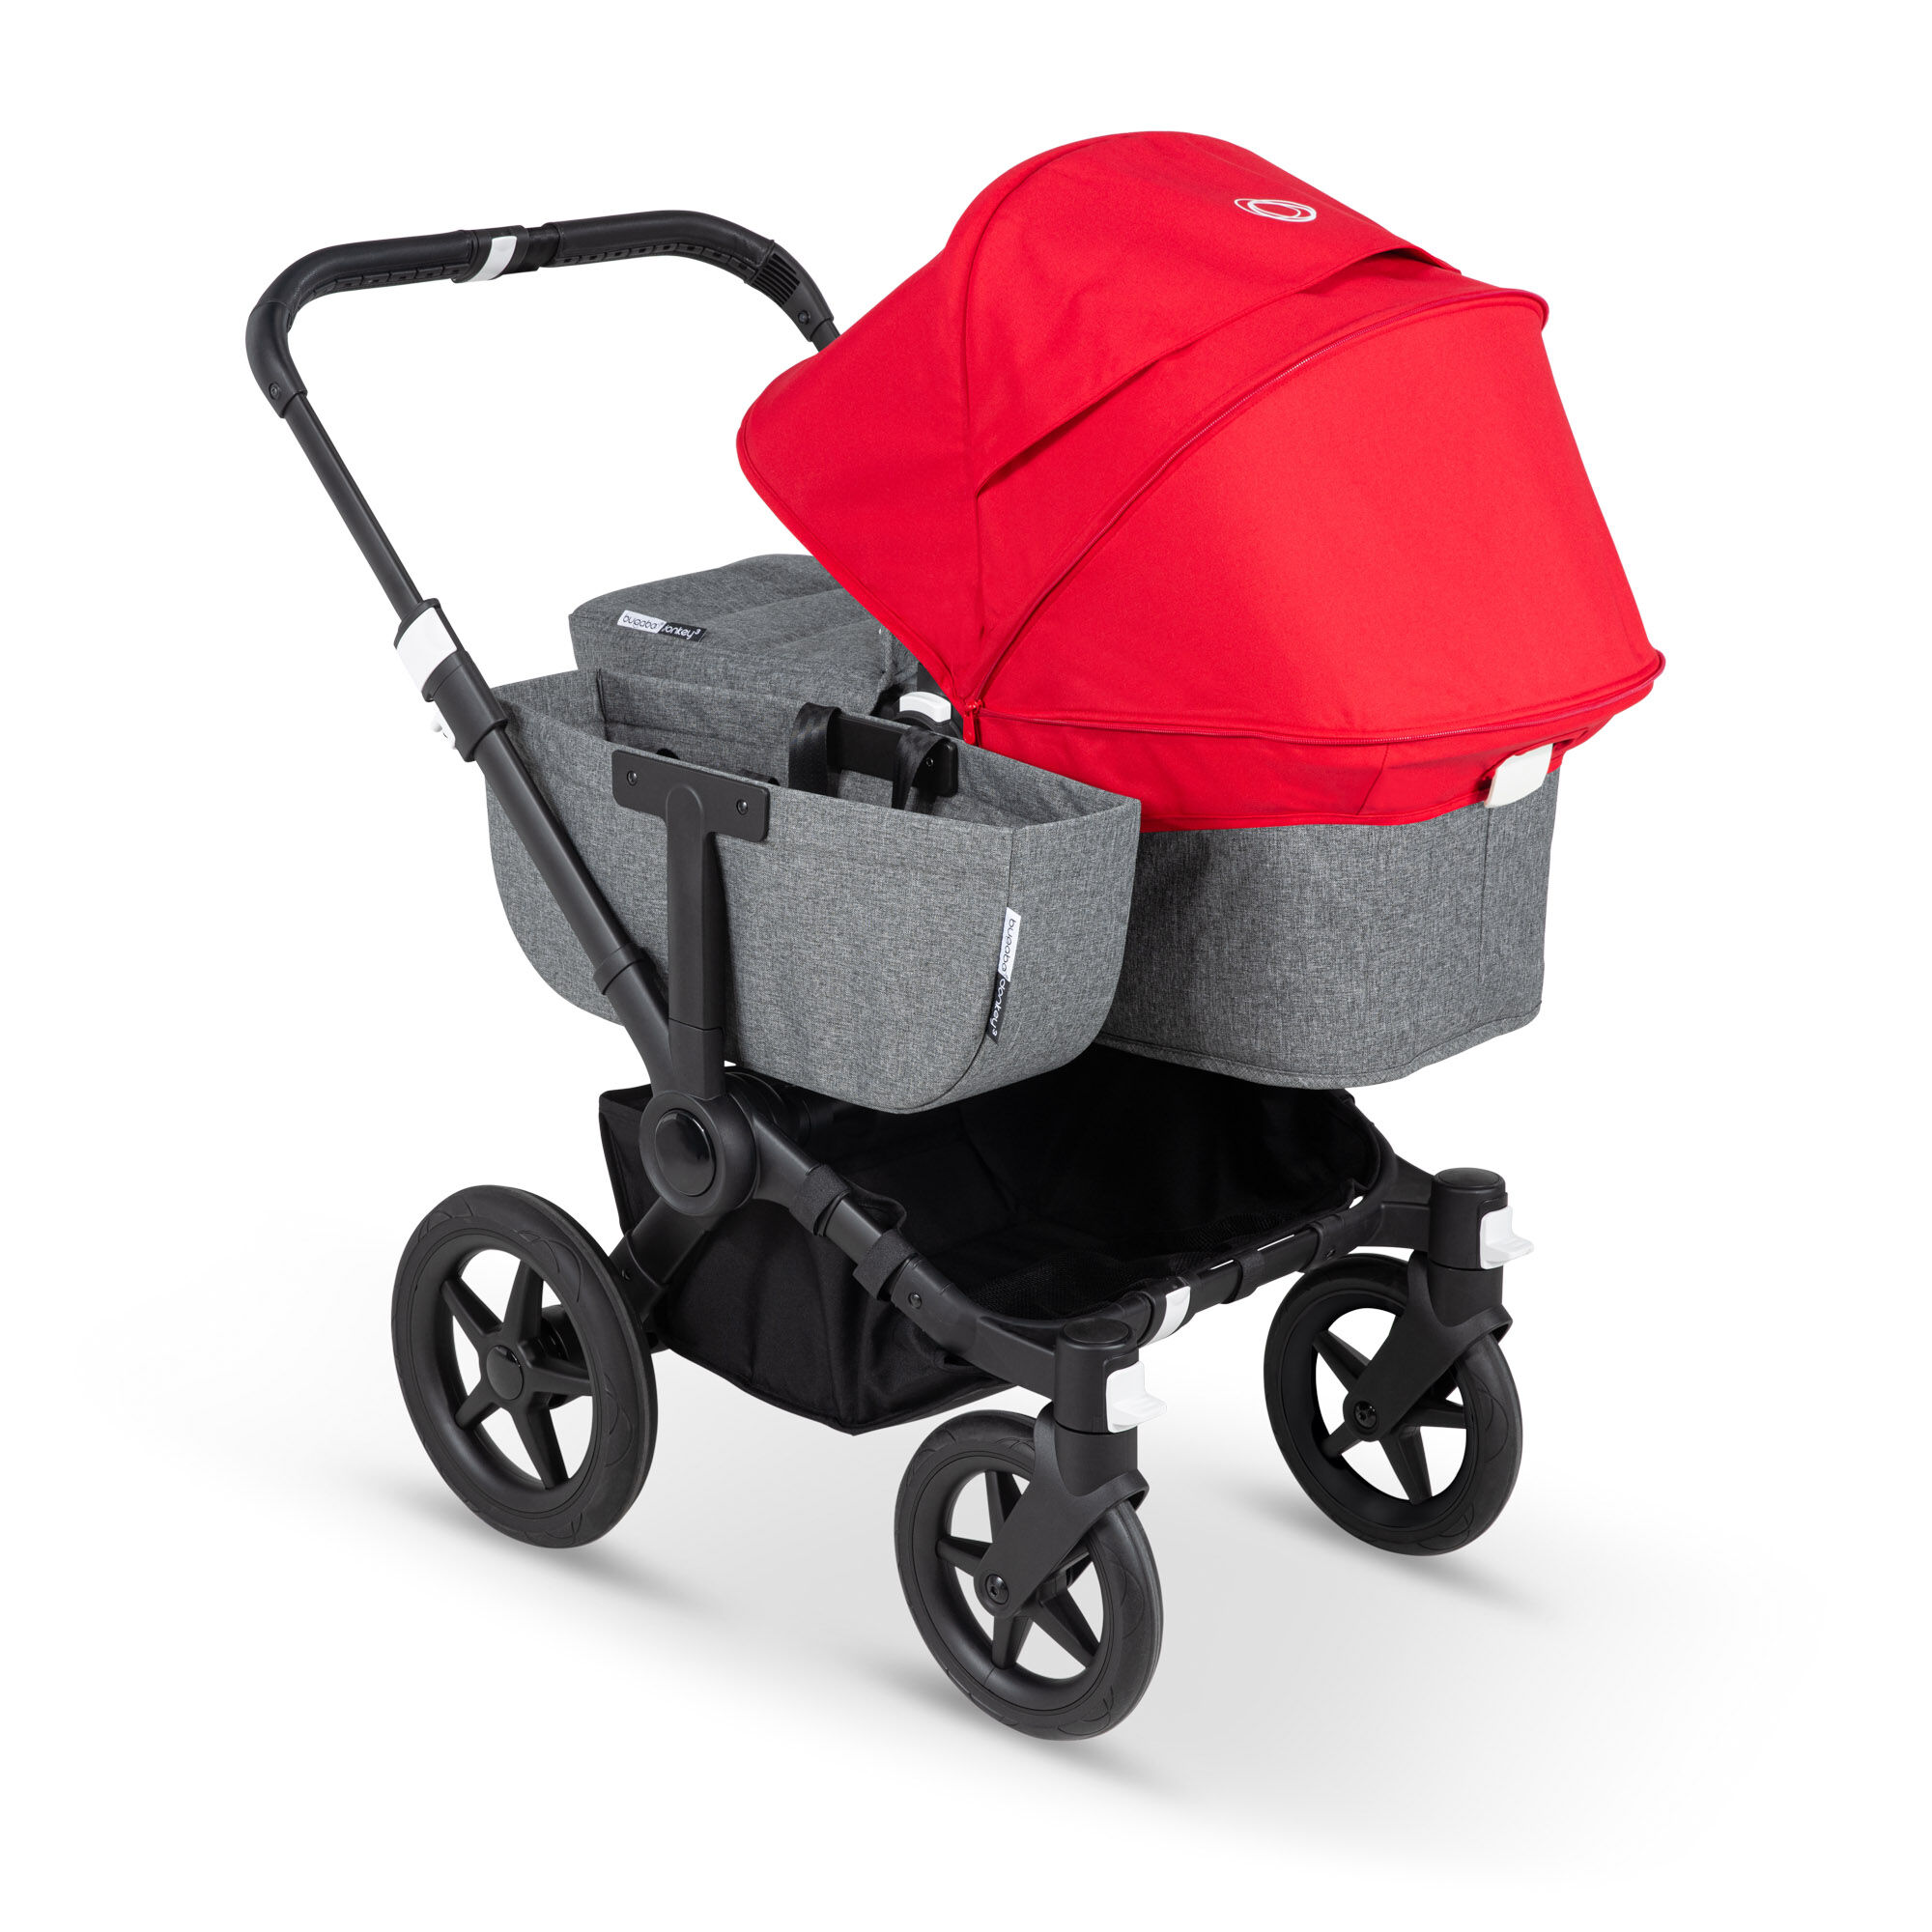 Machine Washable Bugaboo Donkey2 Sun Canopy Red Mélange Extendable Sun Shade for Full Weather Protection 